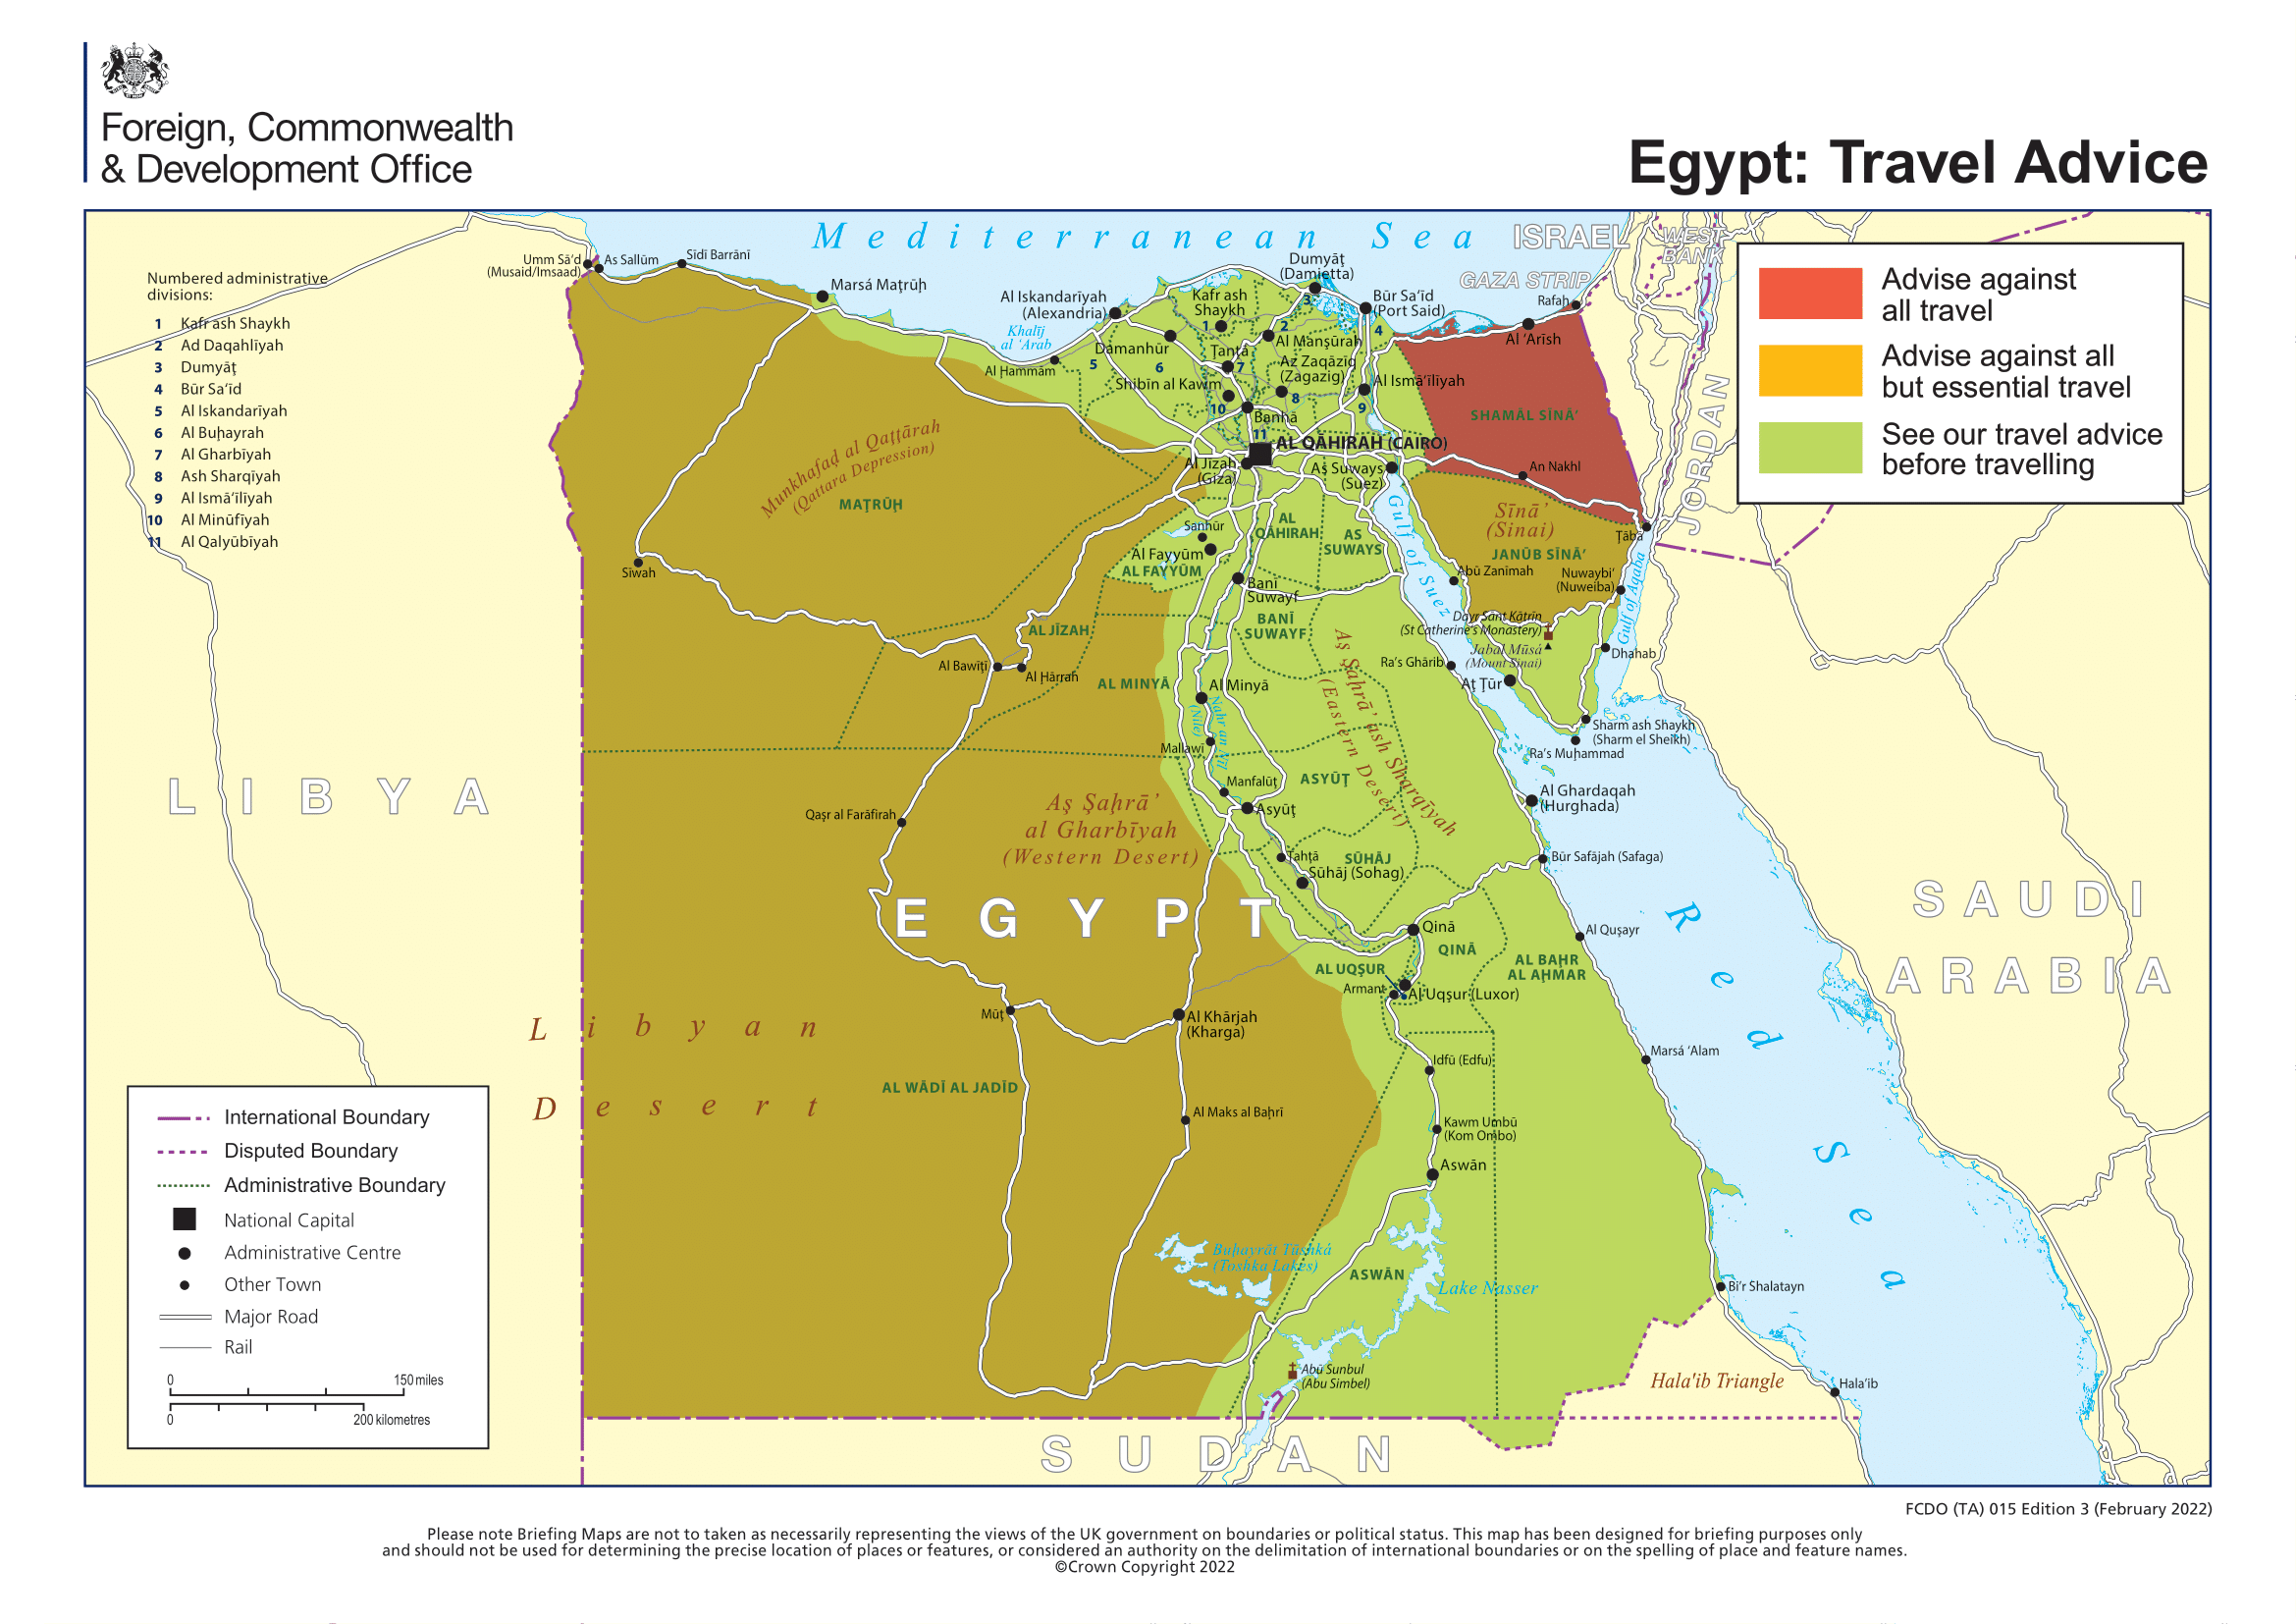 Egypt Travel Advisory Is Egypt A Safe Country For Travel?